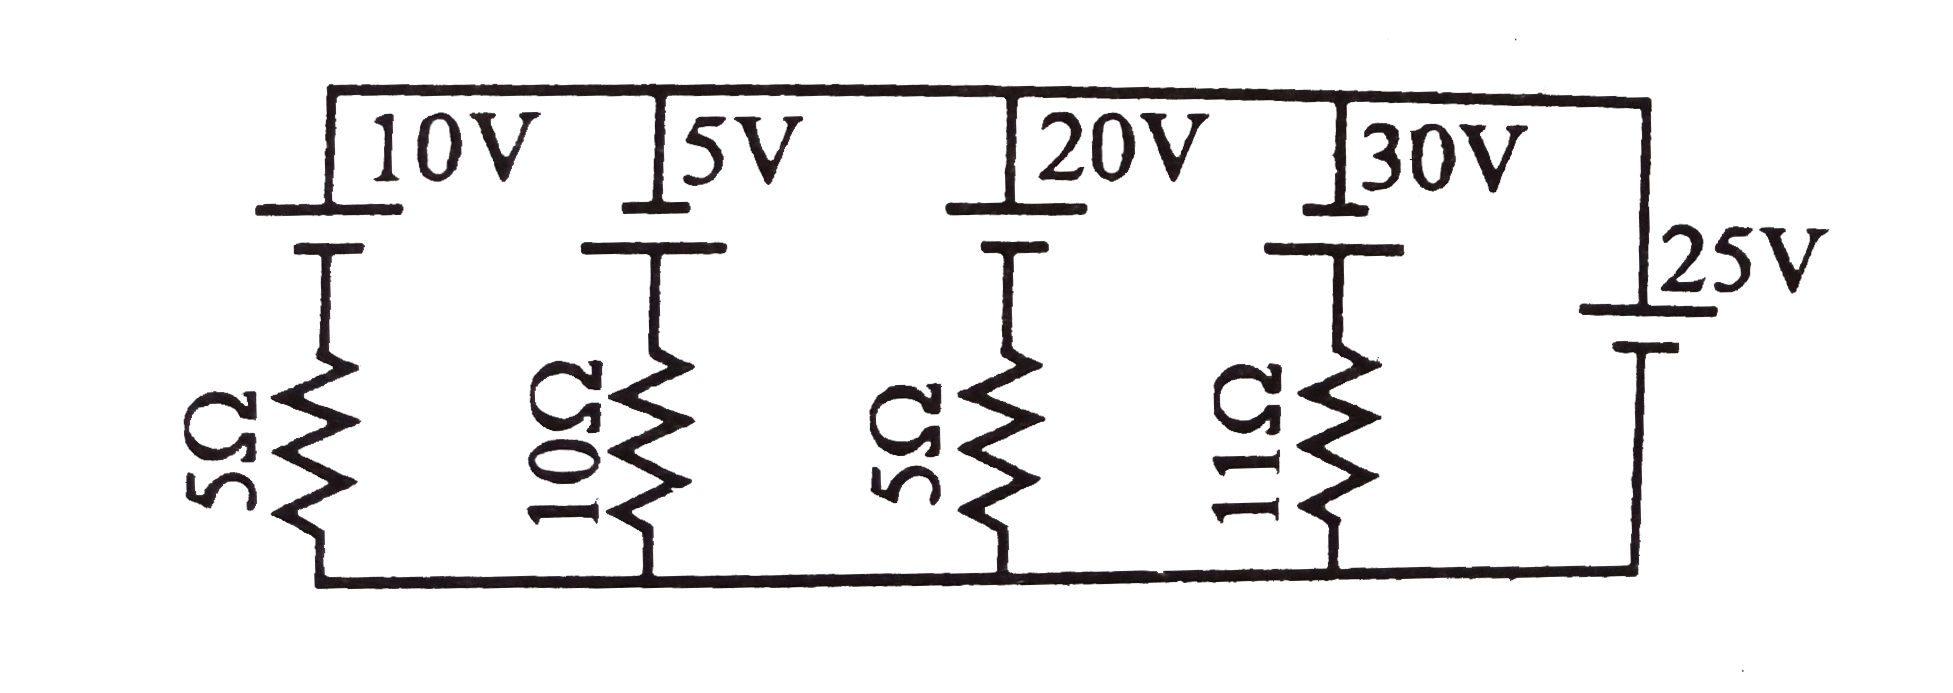 Find the current through 25V cell & power supplied by 20V cell in the figure shown